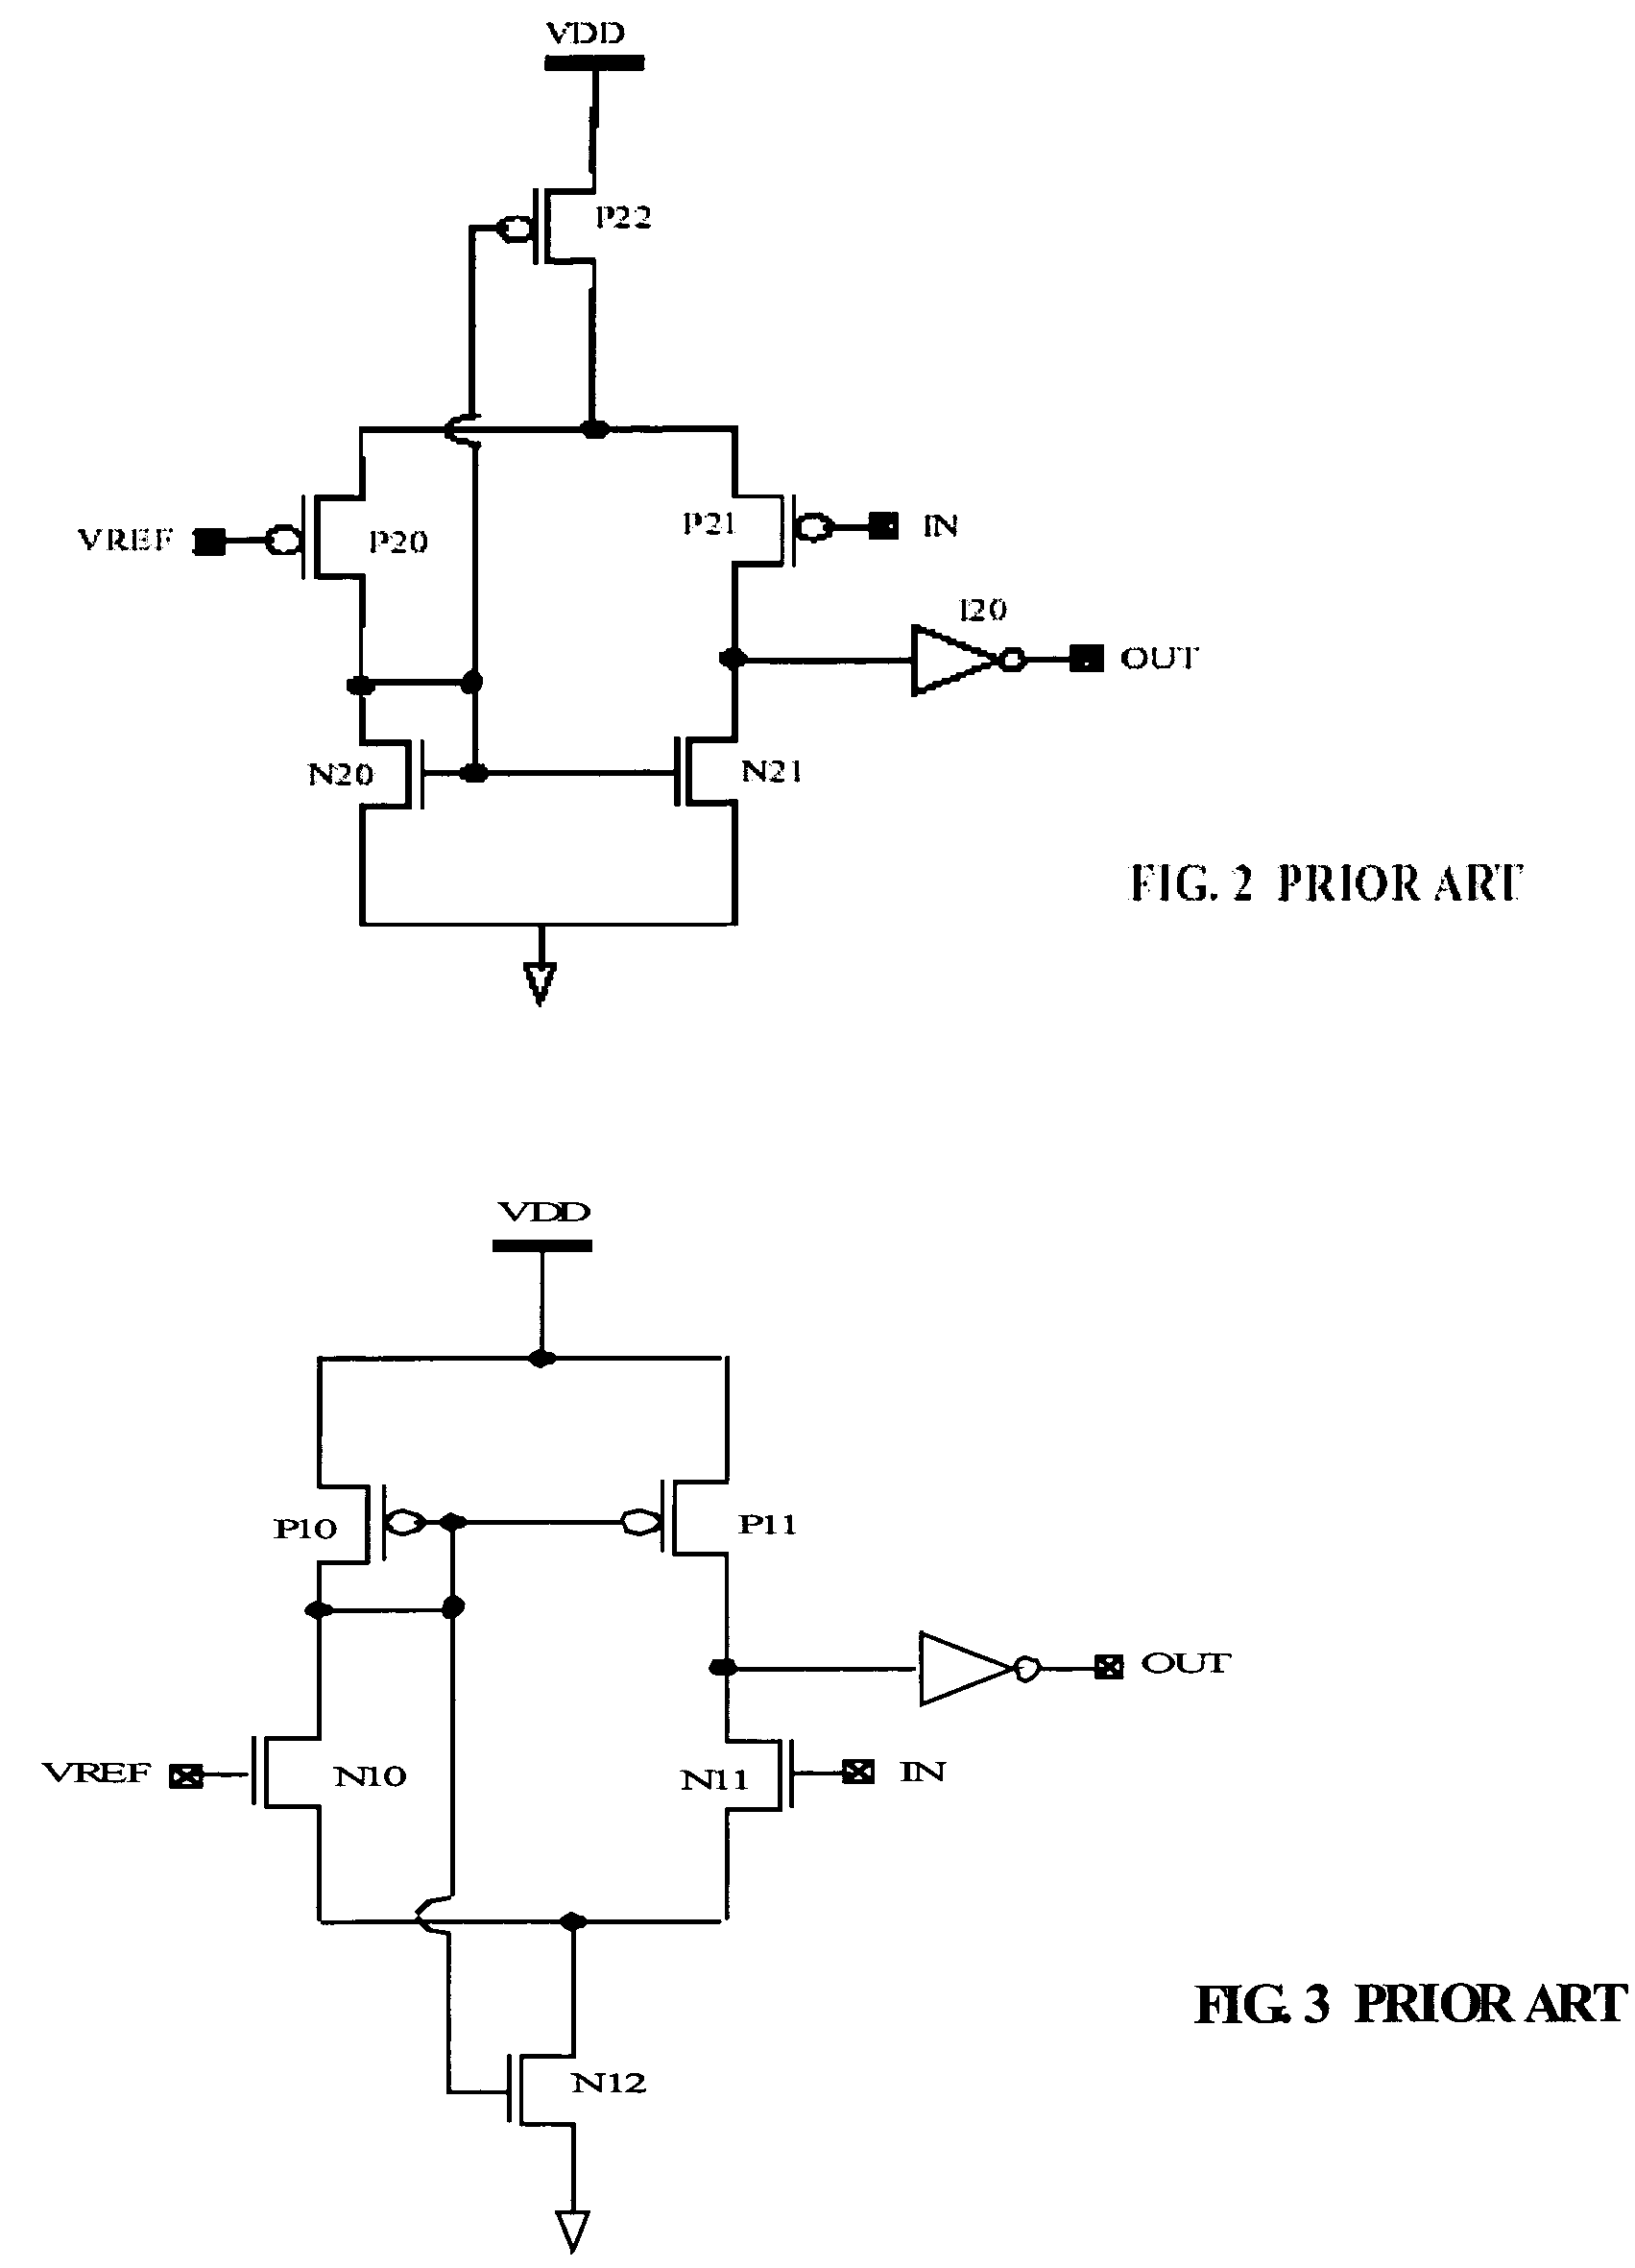 Input/output block with programmable hysteresis